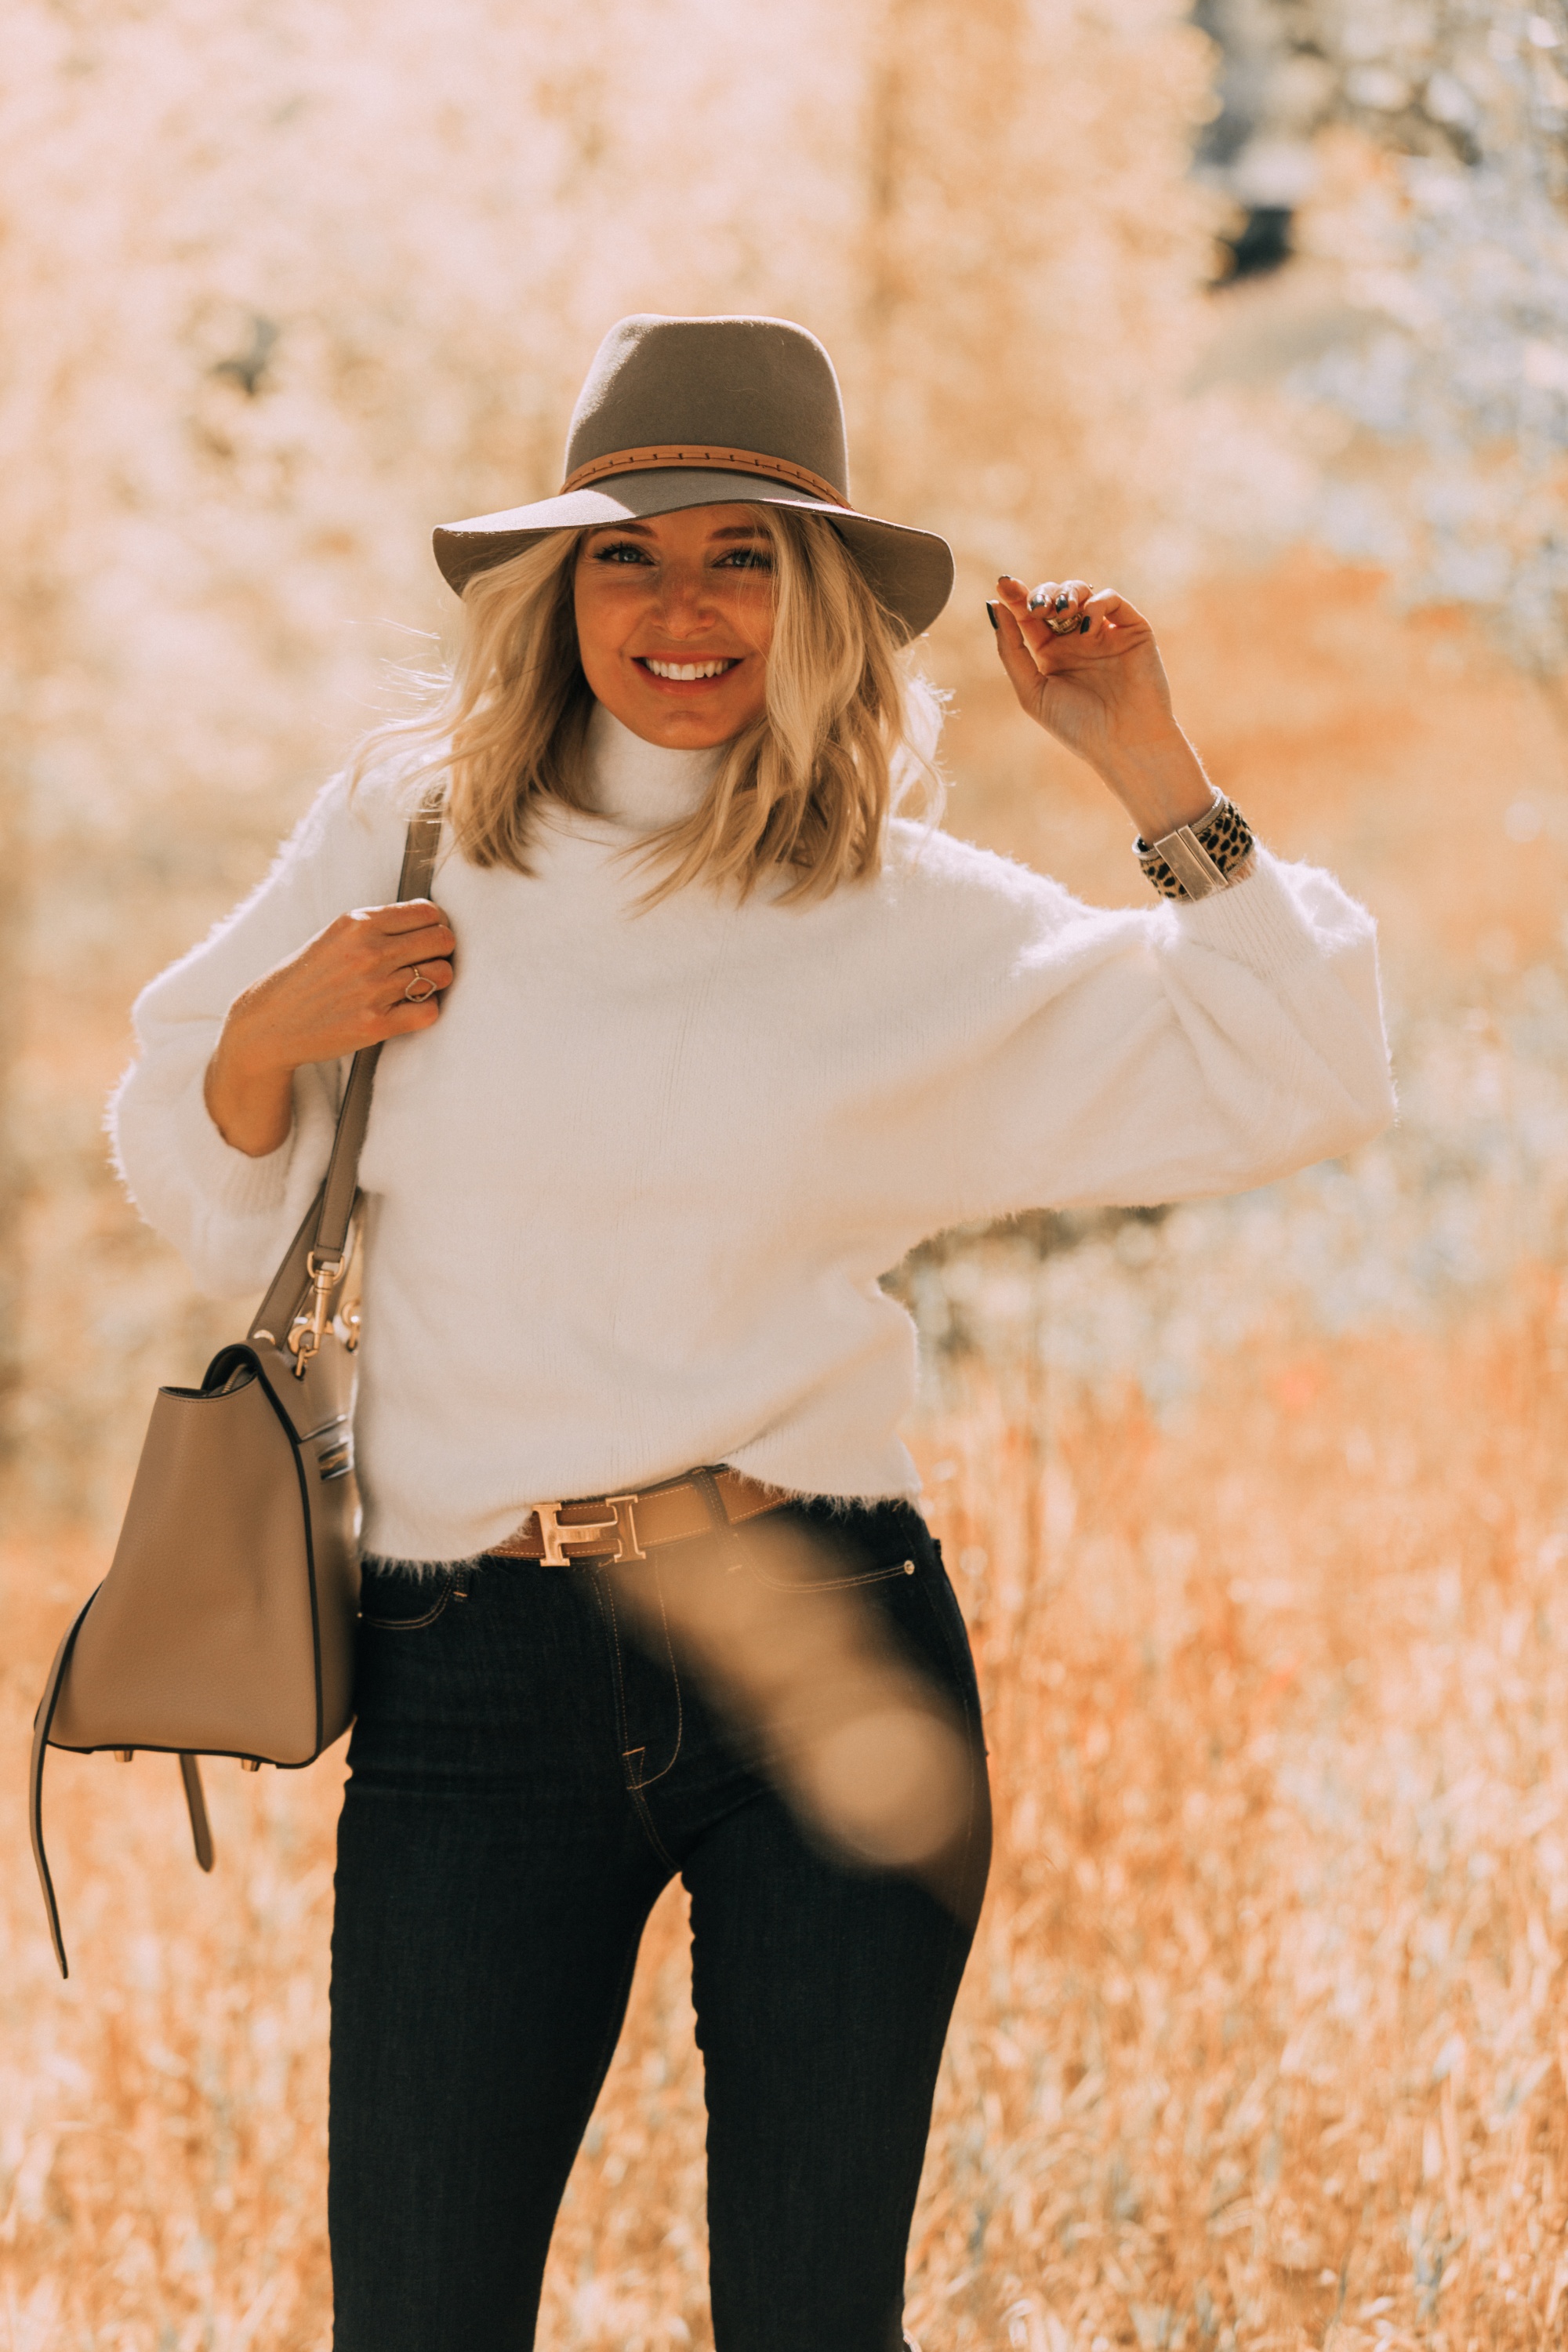 Fuzzy Sweaters, Fashion blogger Erin Busbee of BusbeeStyle.com wearing a white fuzzy sweater by Line & Dot with rag & bone skinny jeans, brown knee high boots, celine belt bag, and treasure & bond floppy brim hat in Telluride, Colorado